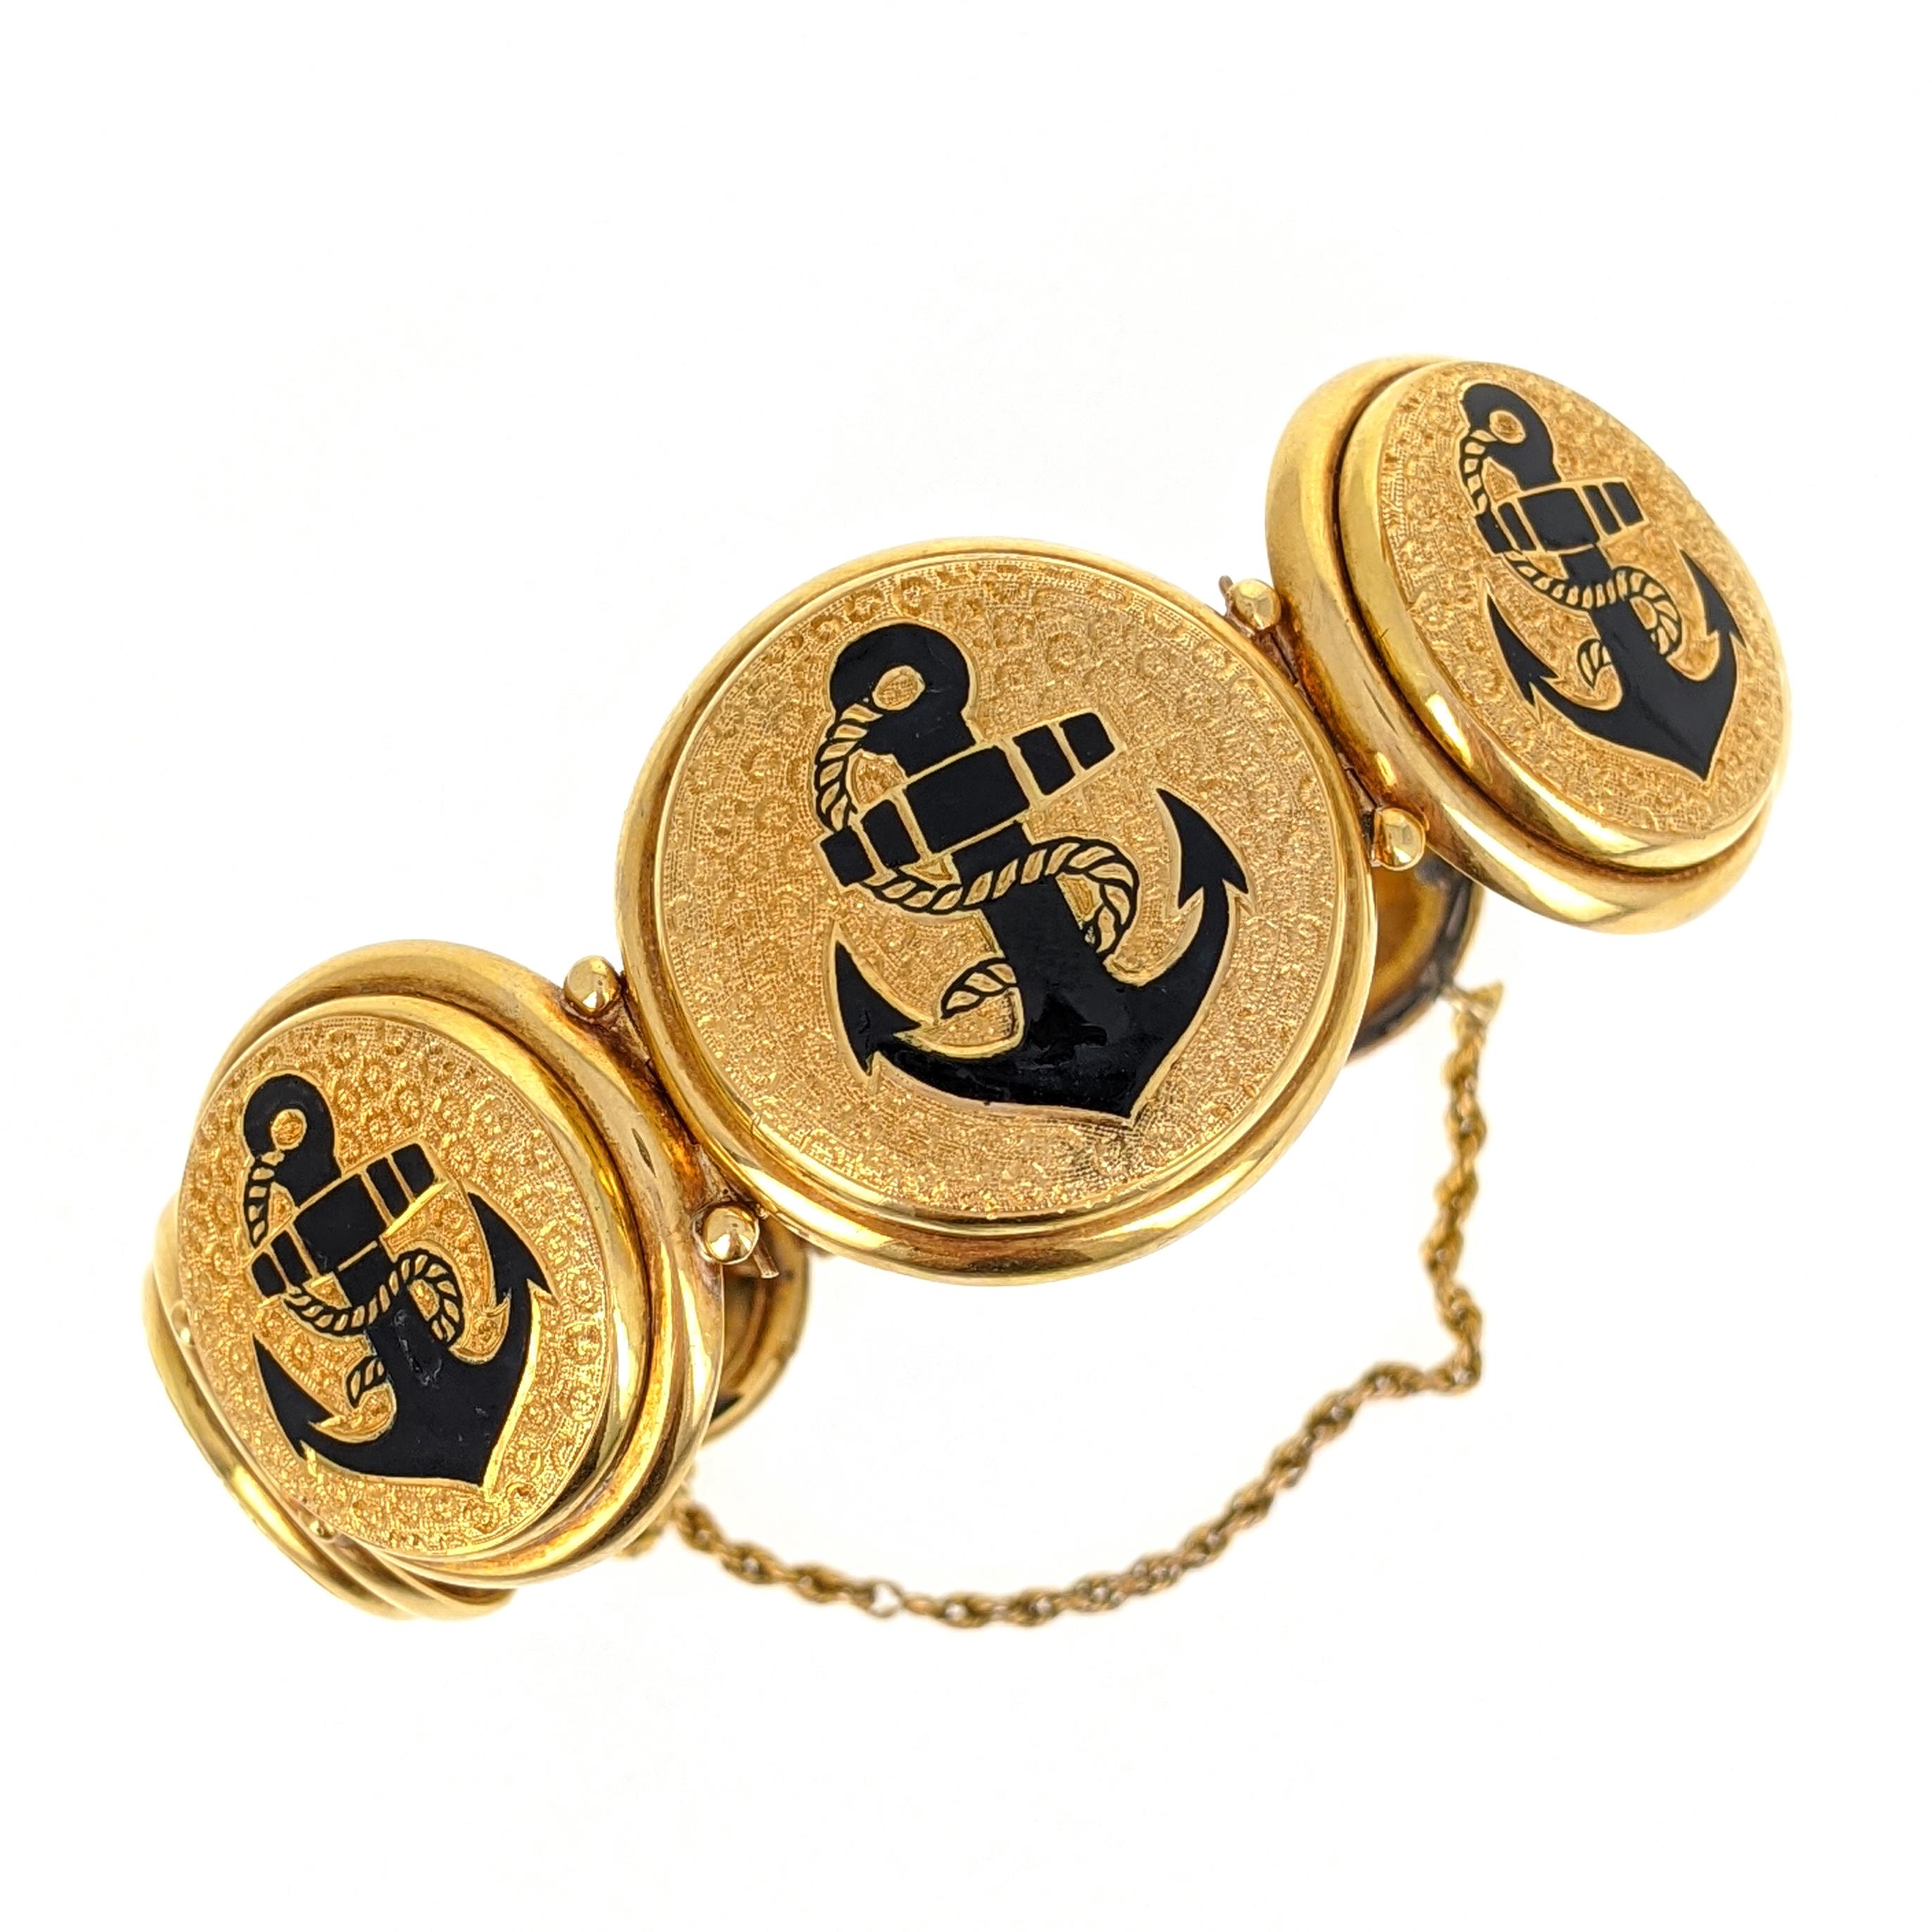 Antique Anchors Enamel Gold Link Bracelet In Good Condition For Sale In New York, NY